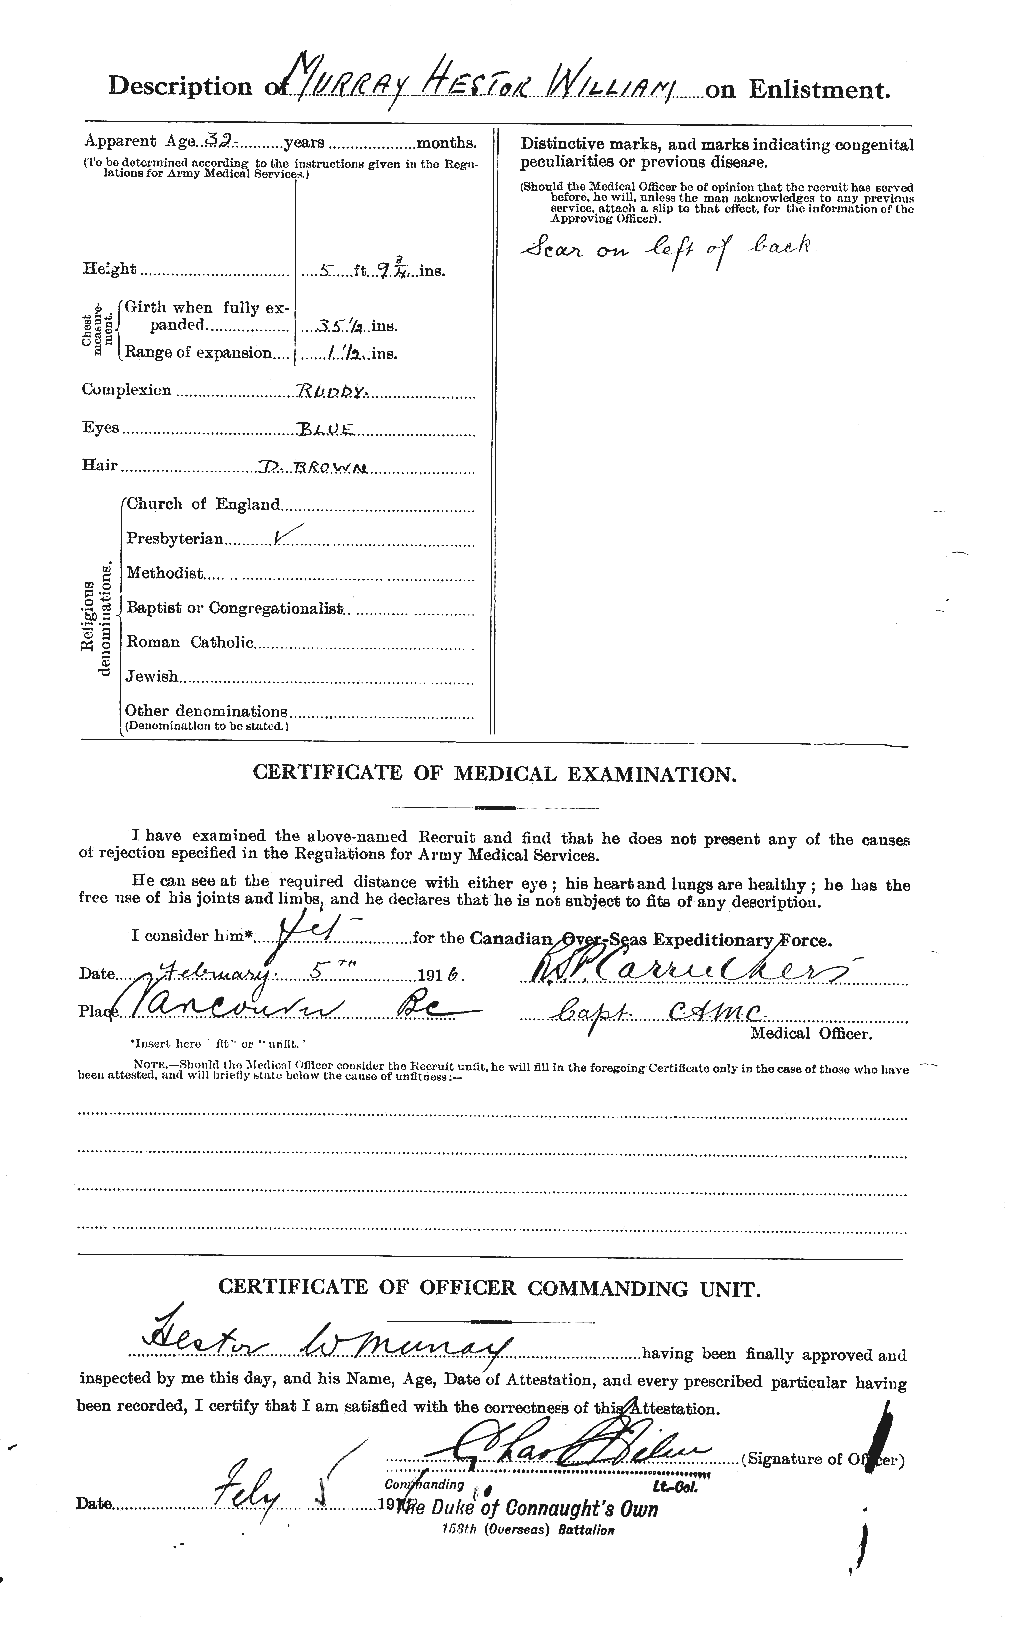 Personnel Records of the First World War - CEF 517977b